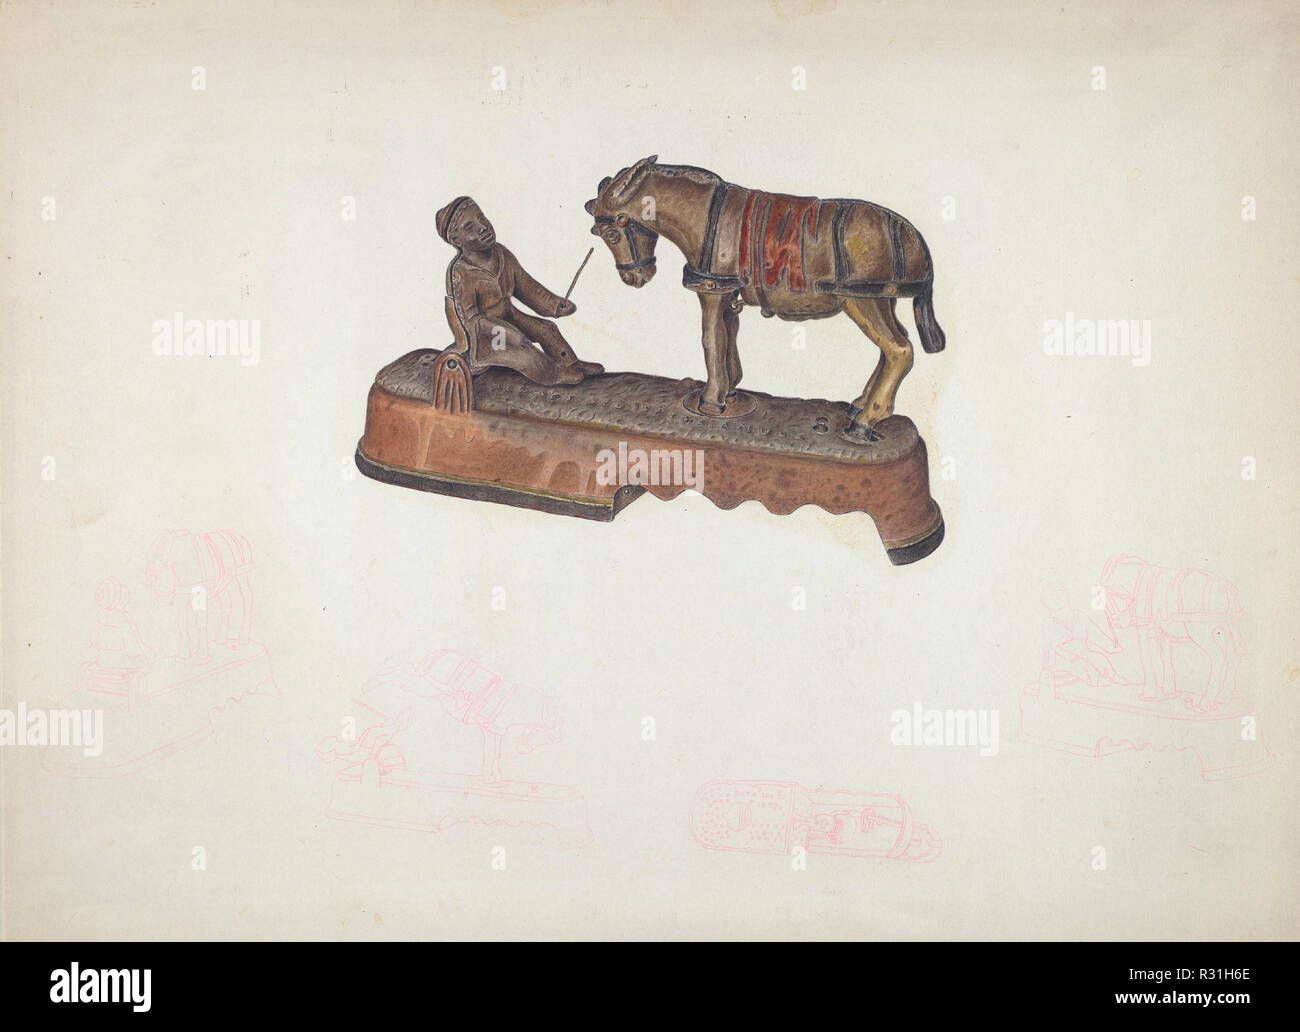 Toy Bank: Mule. Dated: c. 1941. Dimensions: overall: 37.1 x 51.3 cm (14 5/8 x 20 3/16 in.). Medium: watercolor, graphite, and colored pencil on paper. Museum: National Gallery of Art, Washington DC. Author: American 20th Century. Stock Photo